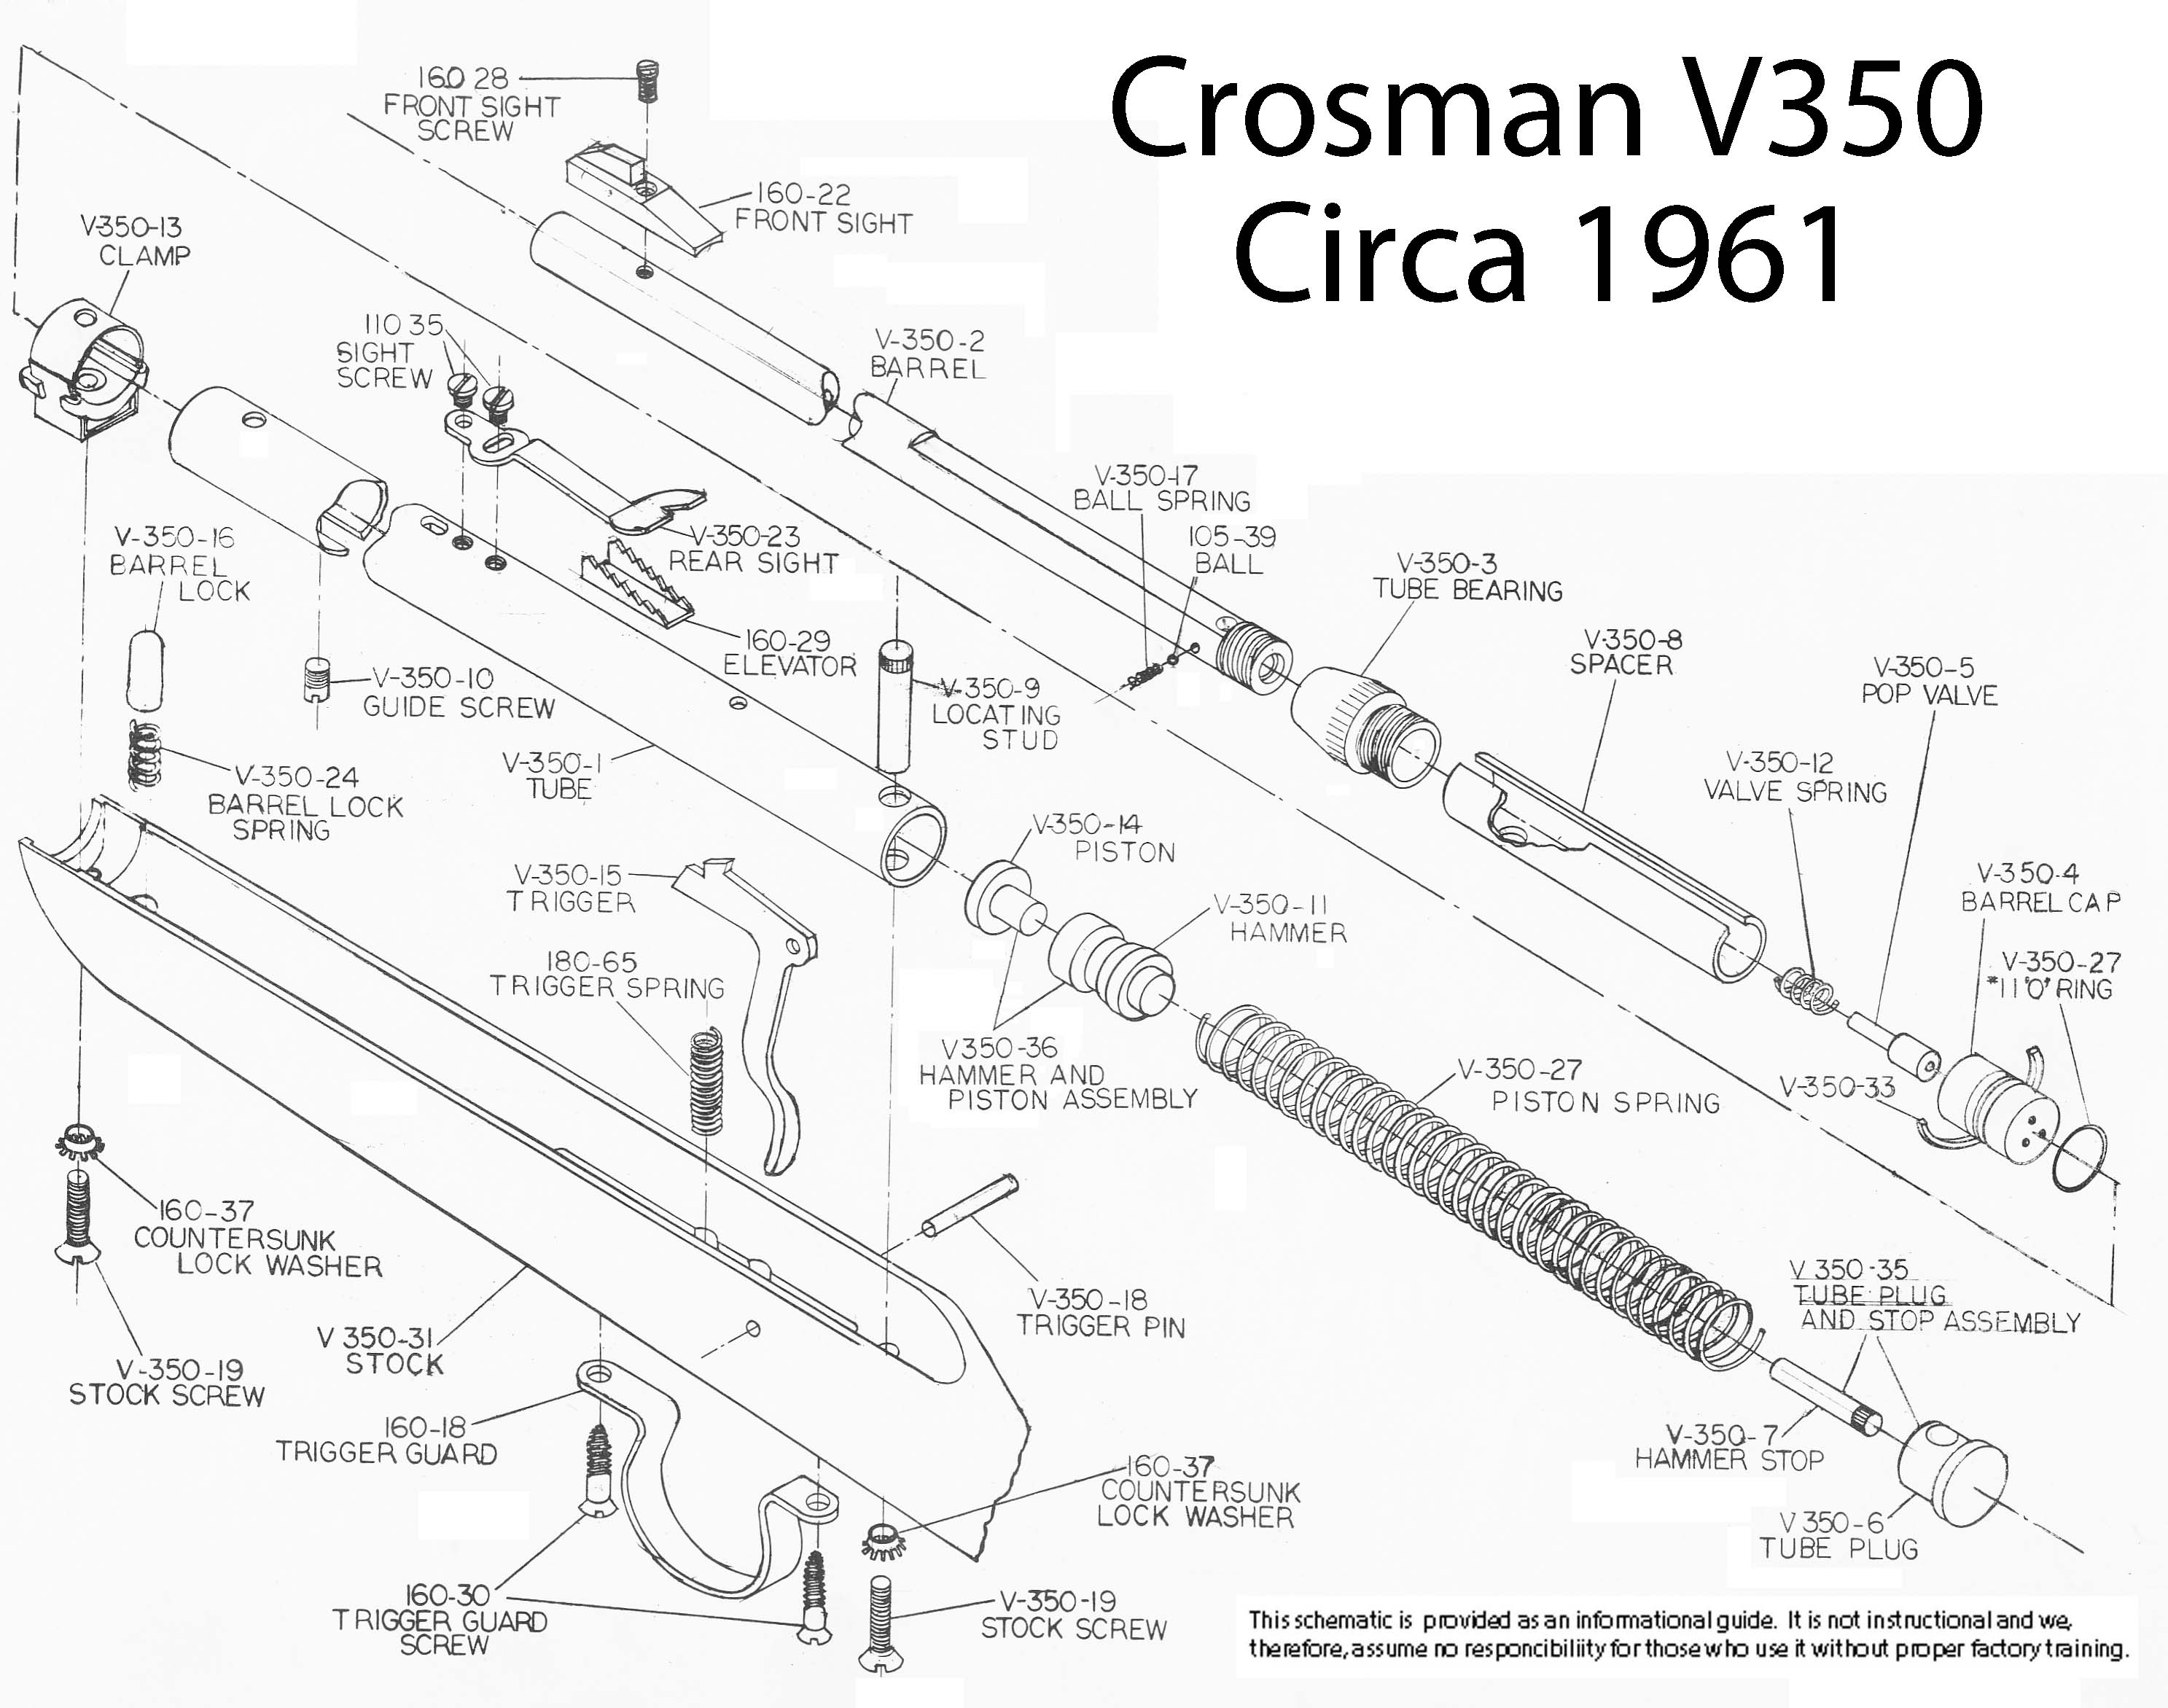 350 or V350 Schematic